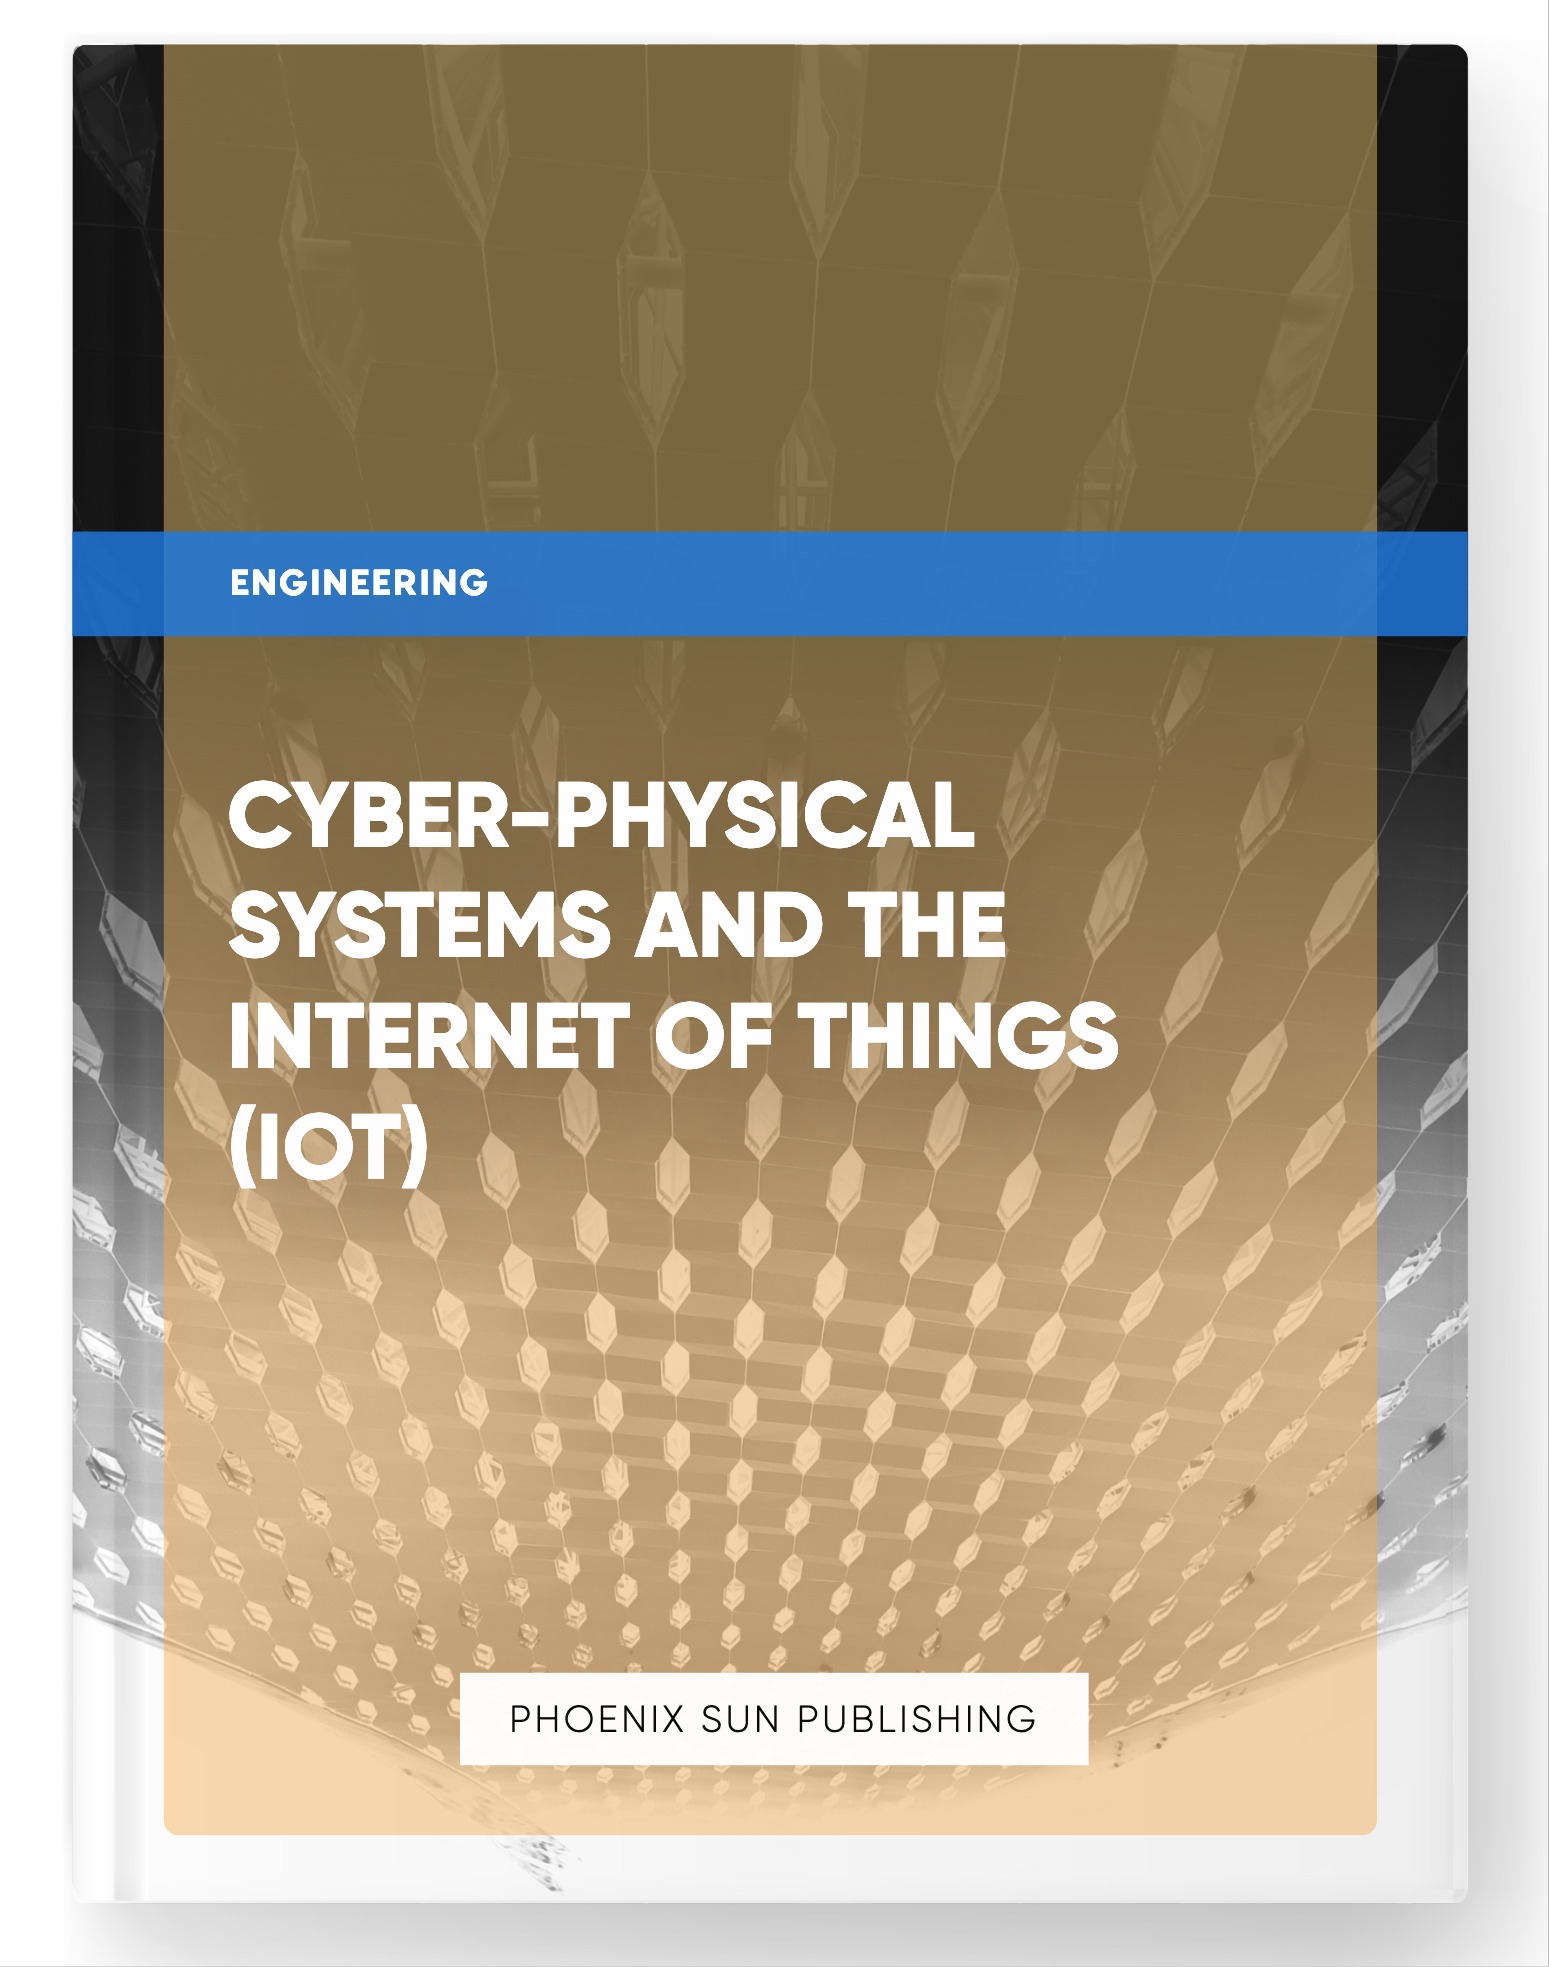 Cyber-Physical Systems and the Internet of Things (IoT)